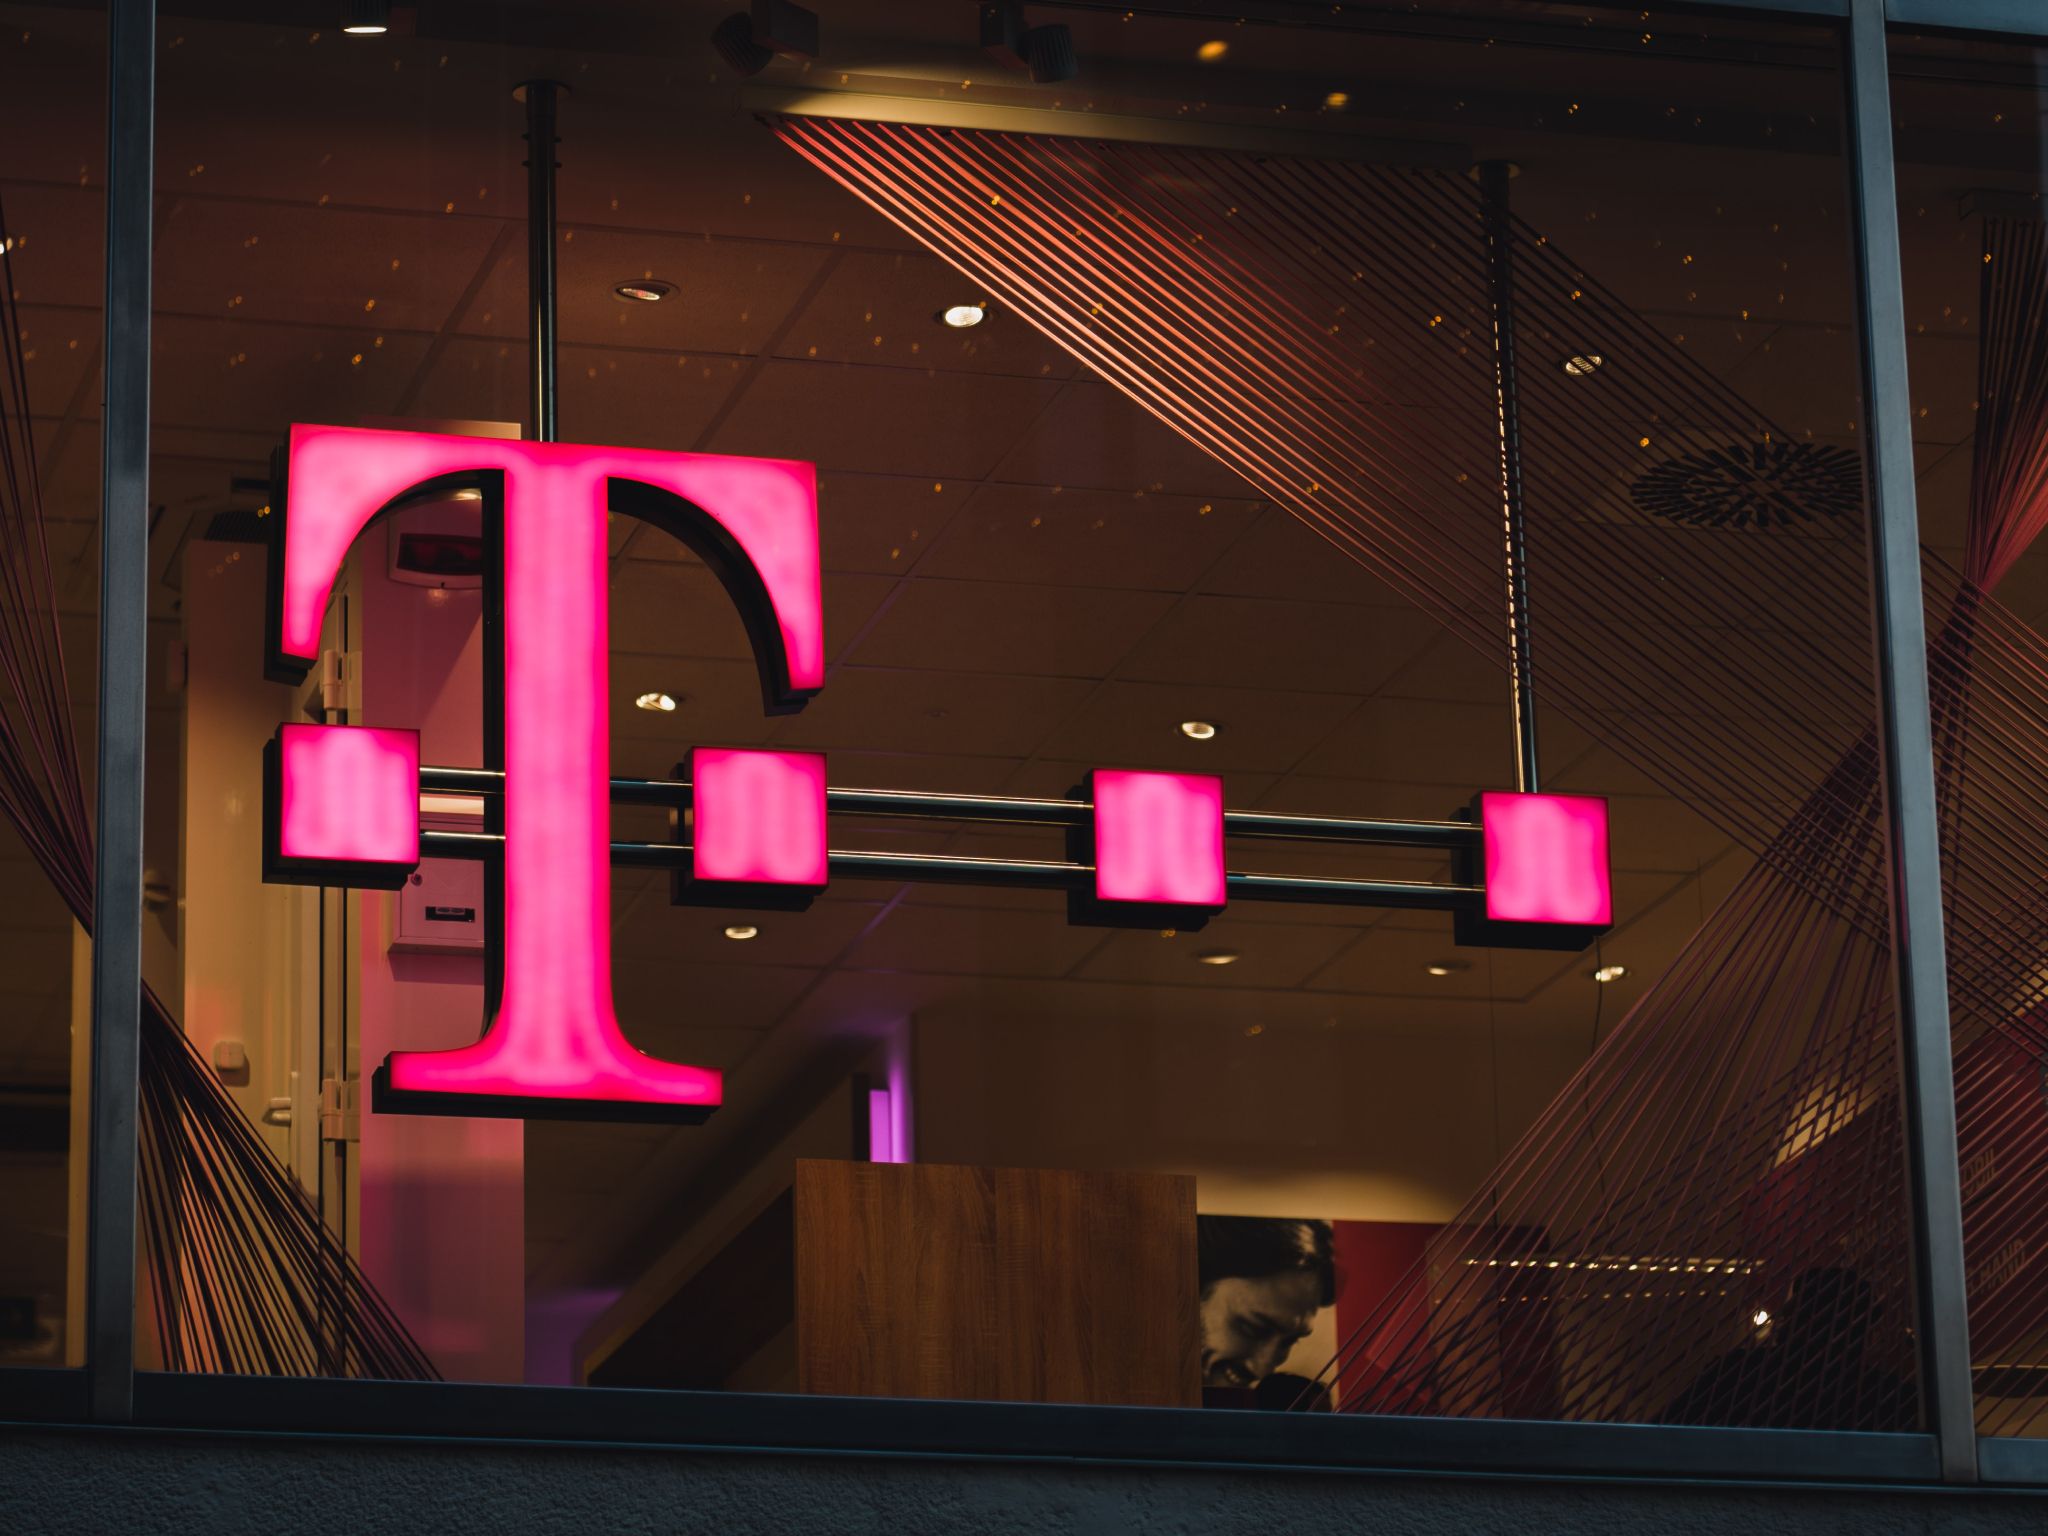 T-Mobile sign hanging in an office building.